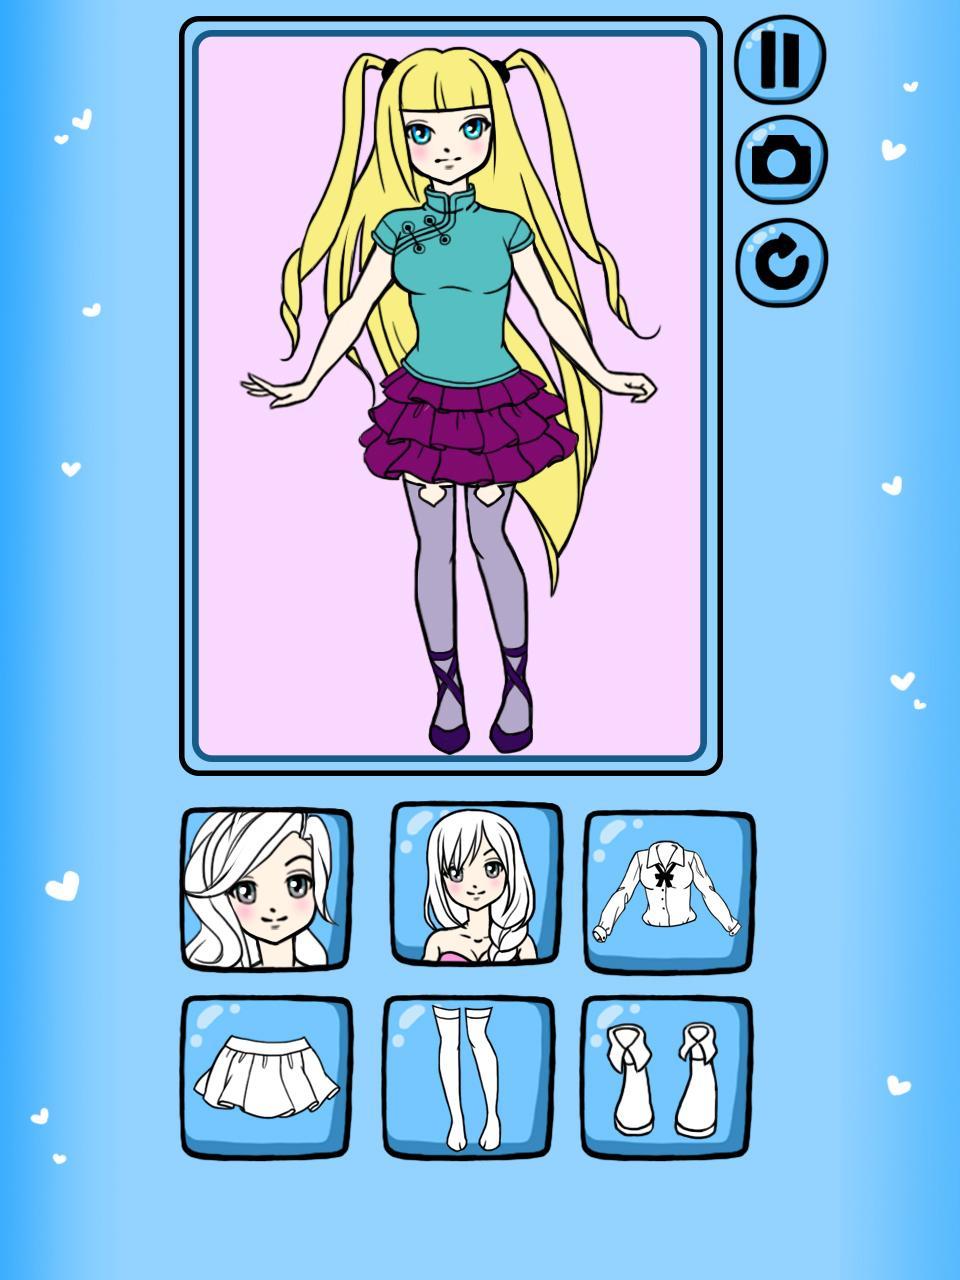 Anime Character Creator for Android - APK Download